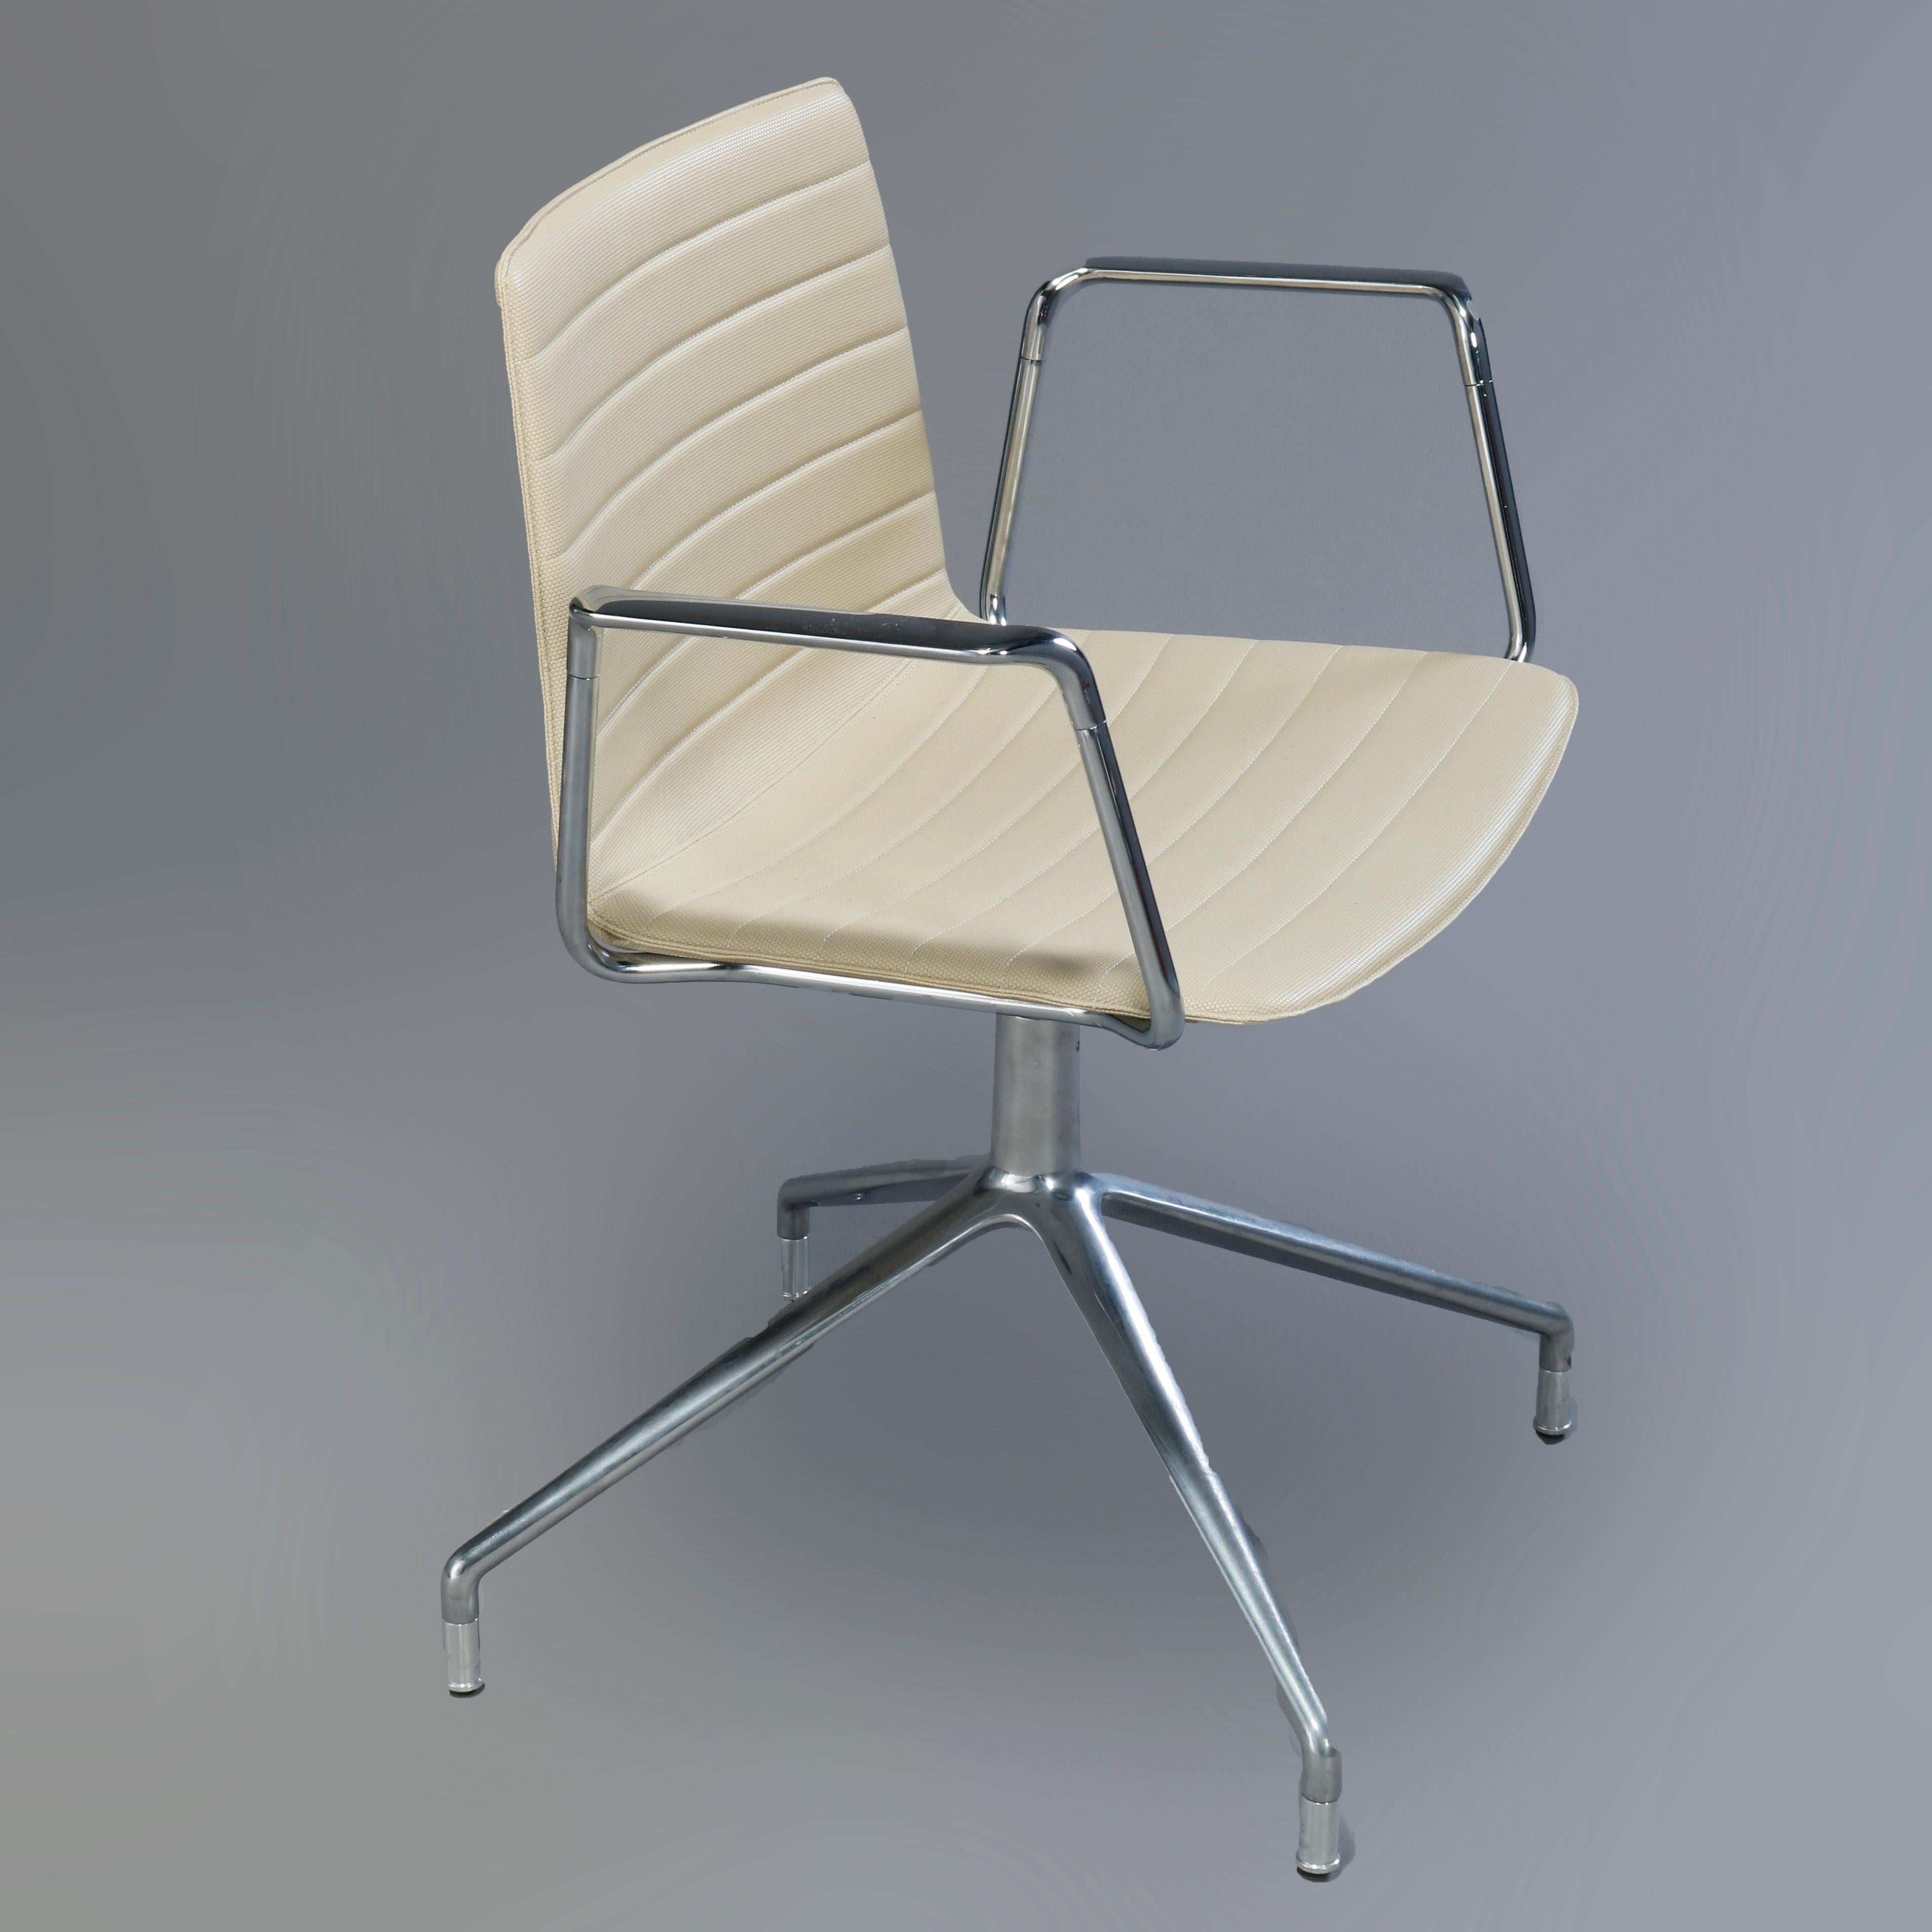 A Mid-Century Modern set of eight swivel Flex chairs by Piergiorgio Cazzaniga for Andreu World in the manner of Eames for Miller offer ribbed polymer seats and backs over chromed steel frame having central post with four spider legs, original label